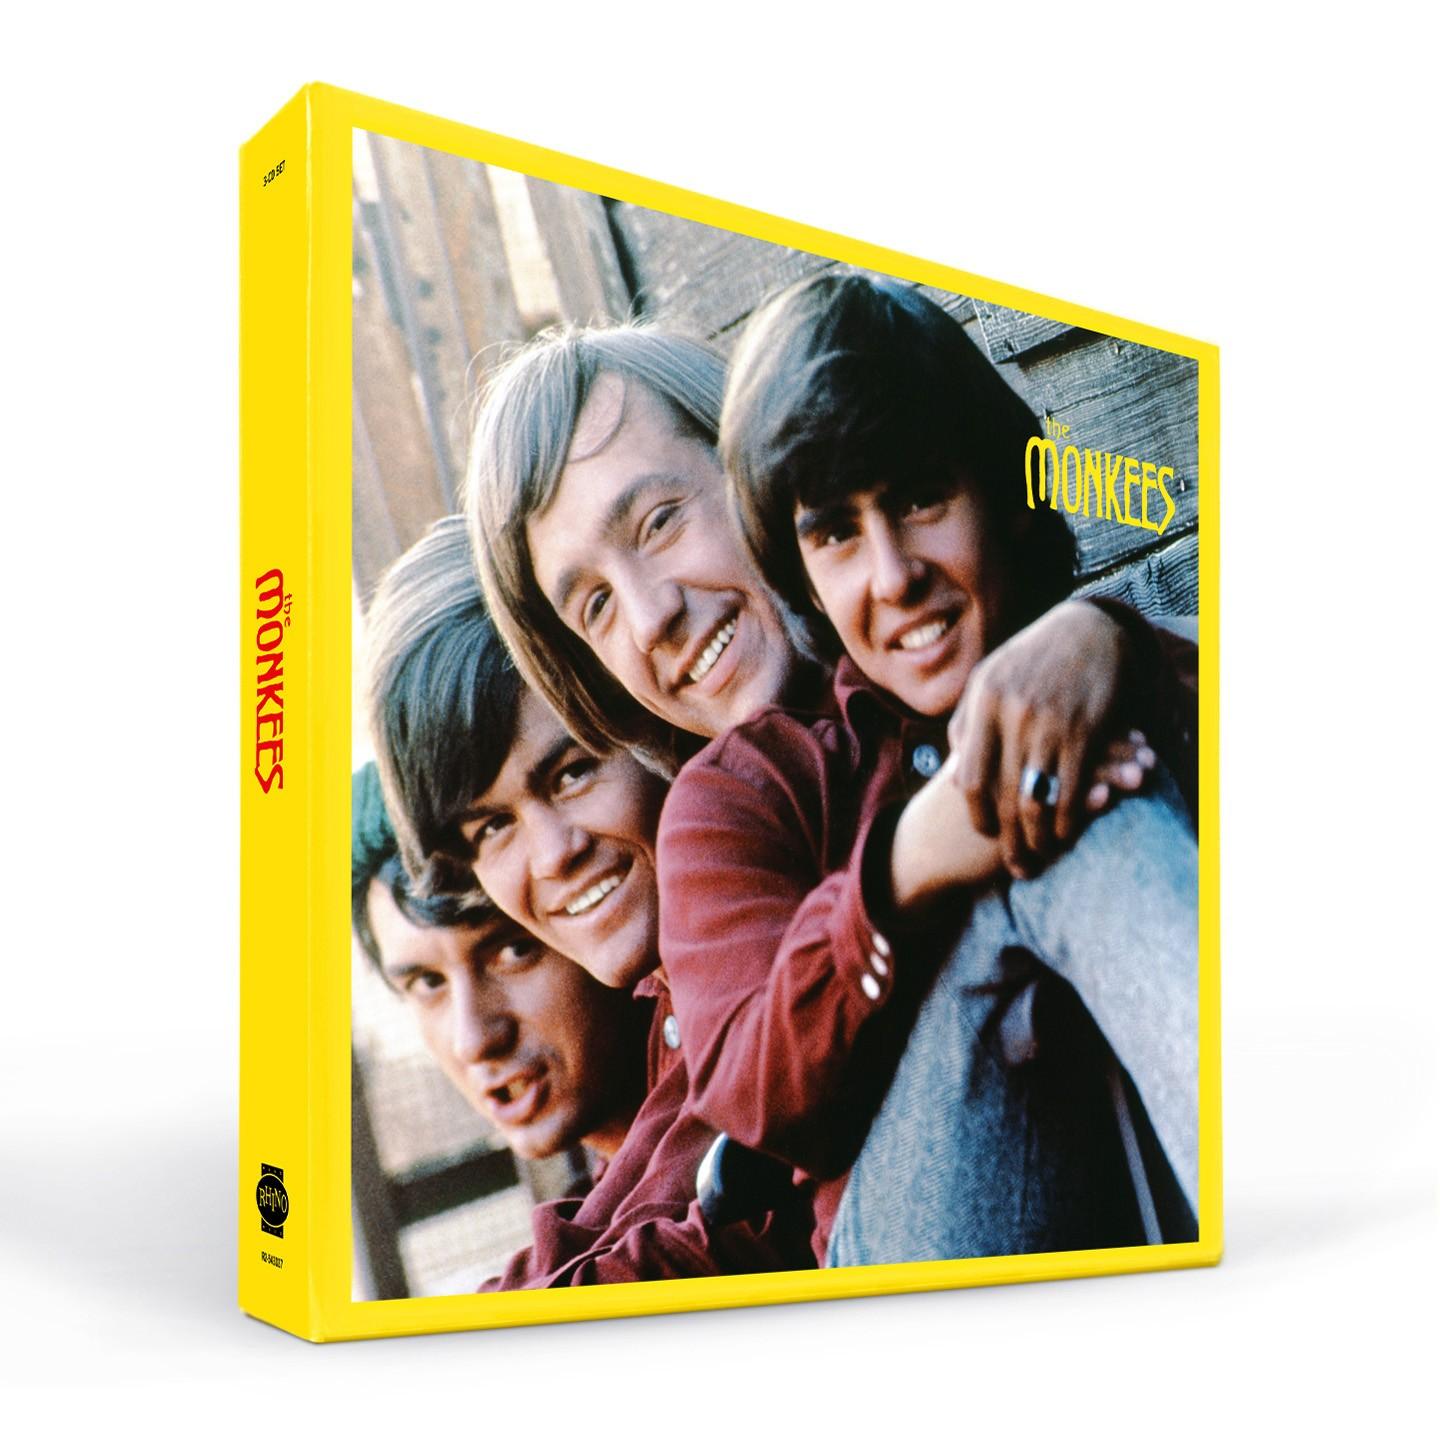 Pre-Order: THE MONKEES (SUPER DELUXE EDITION)